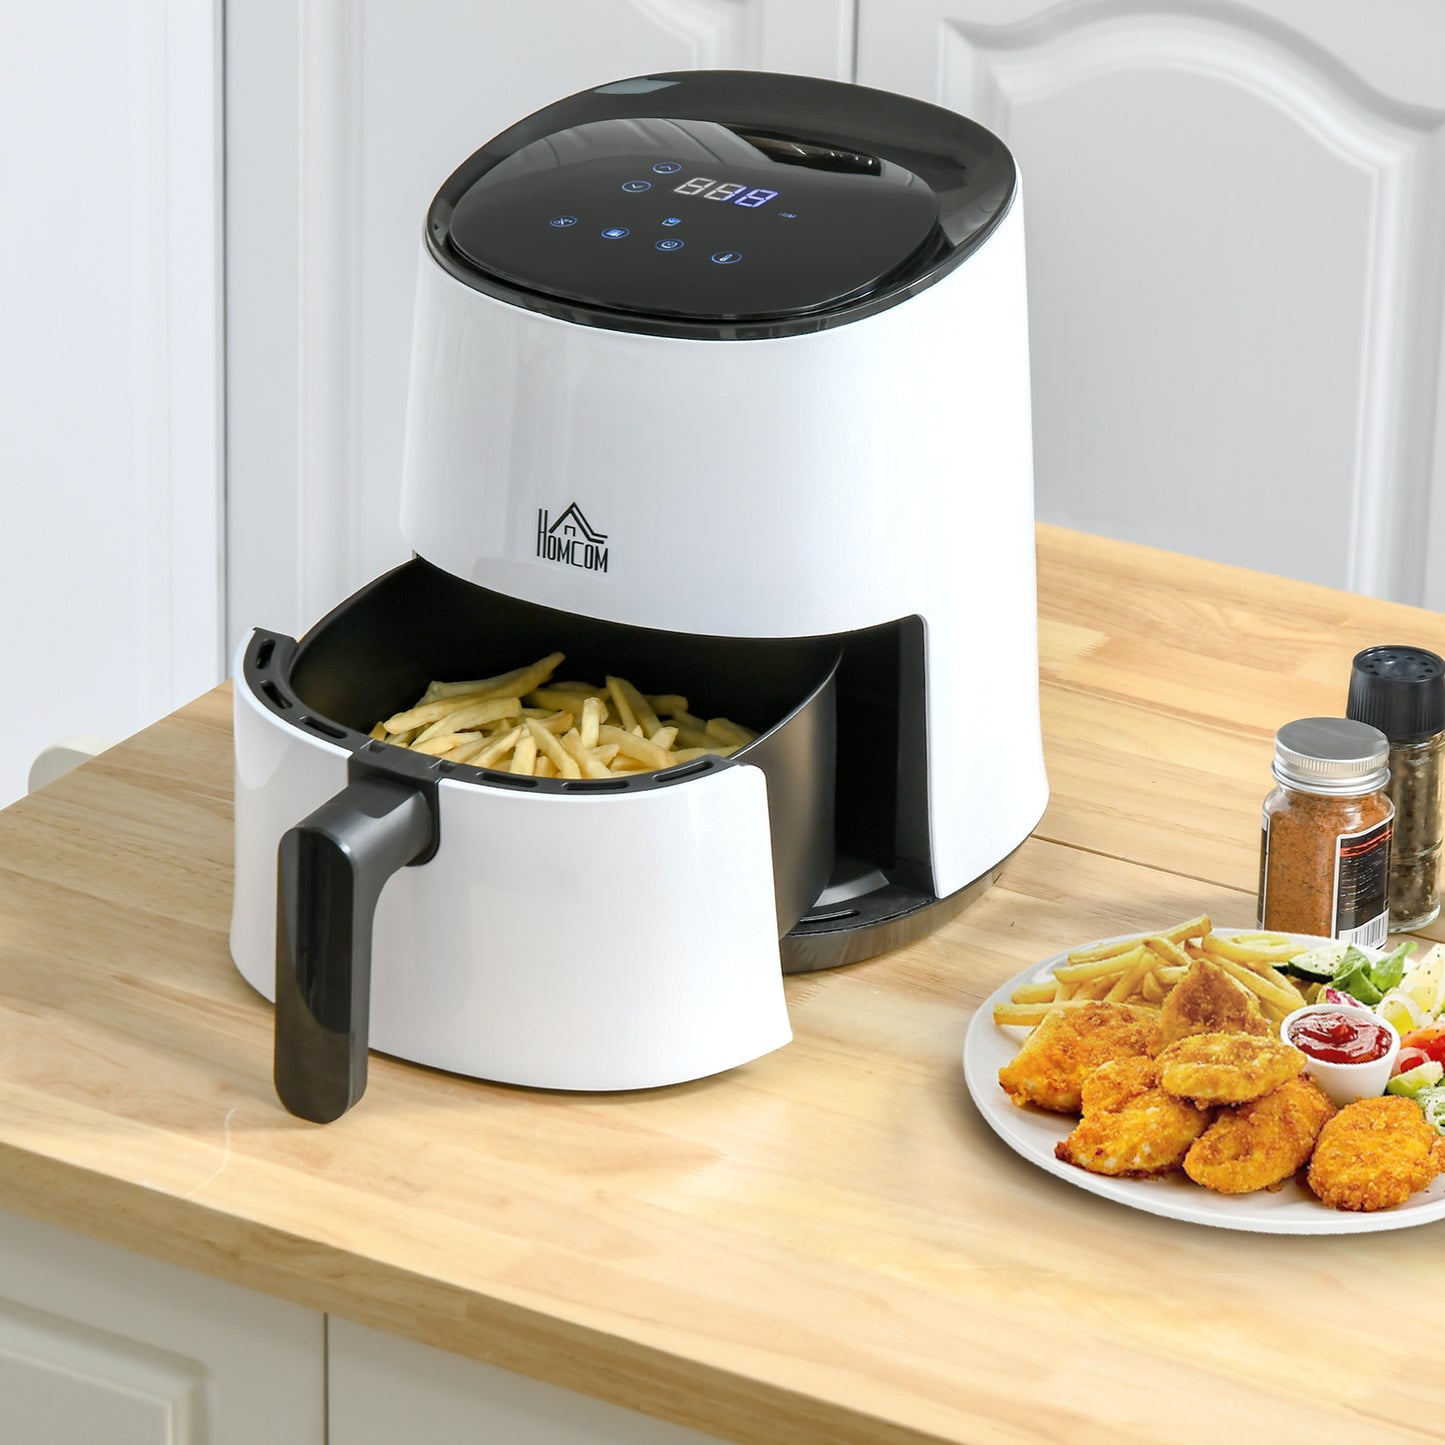 HOMCOM Air Fryer 1700W 6.5L with Digital Display Timer for Low Fat